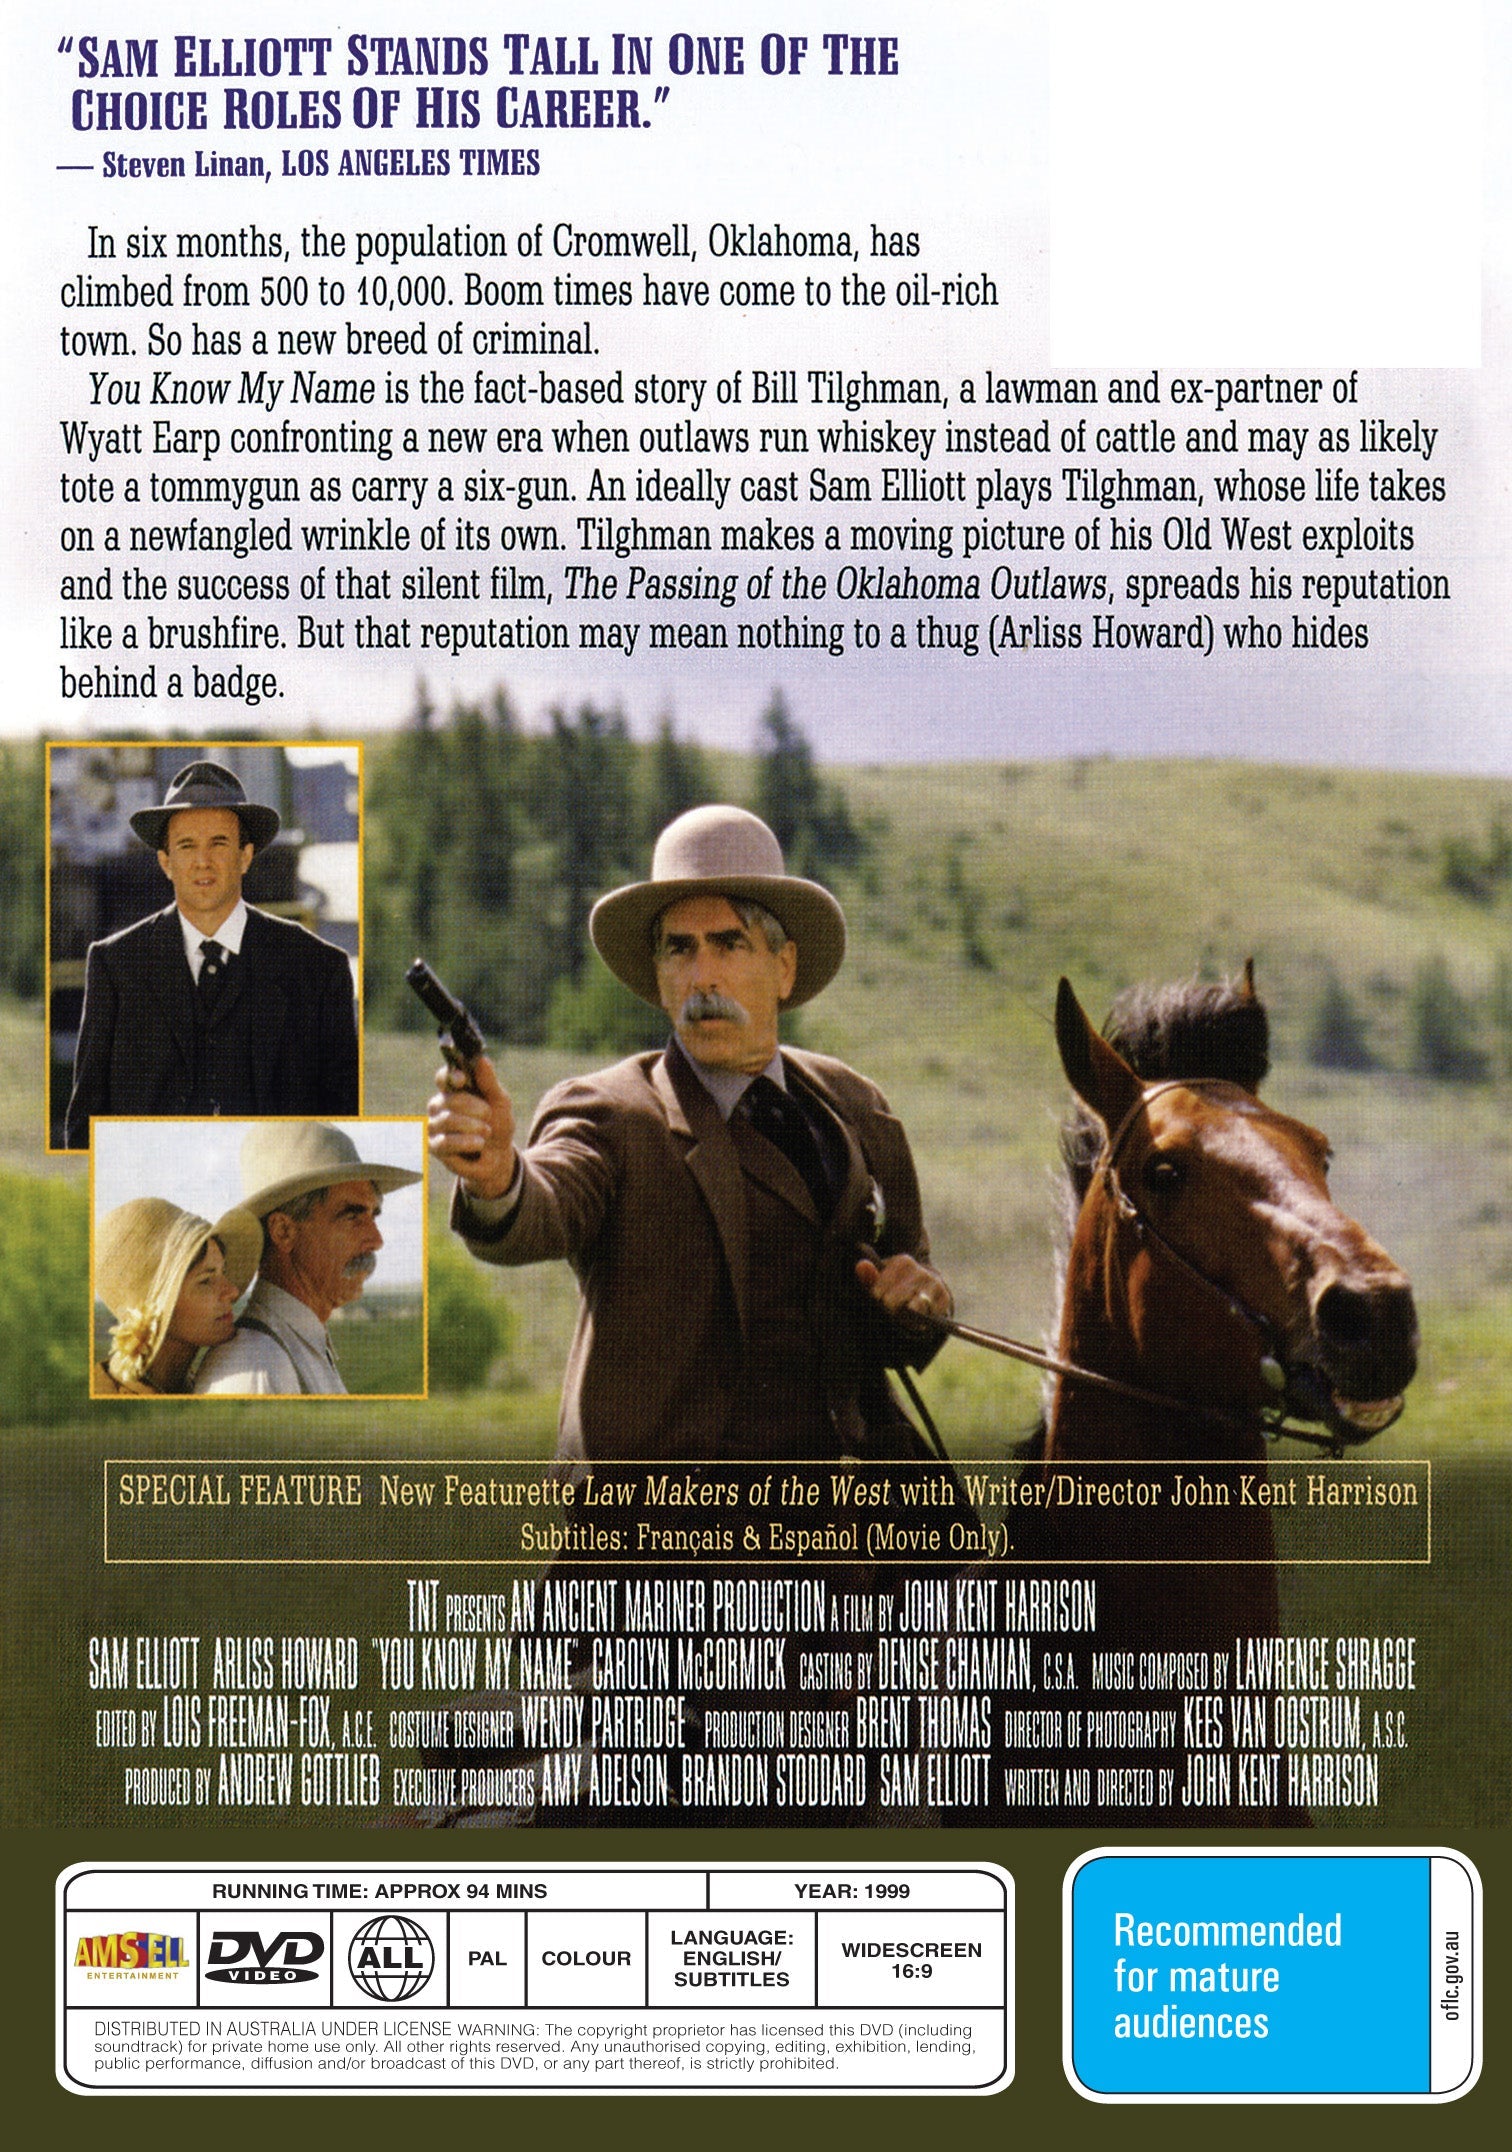 Buy Online You Know My Name (1999) - DVD - Sam Elliott, Arliss Howard | Best Shop for Old classic and hard to find movies on DVD - Timeless Classic DVD